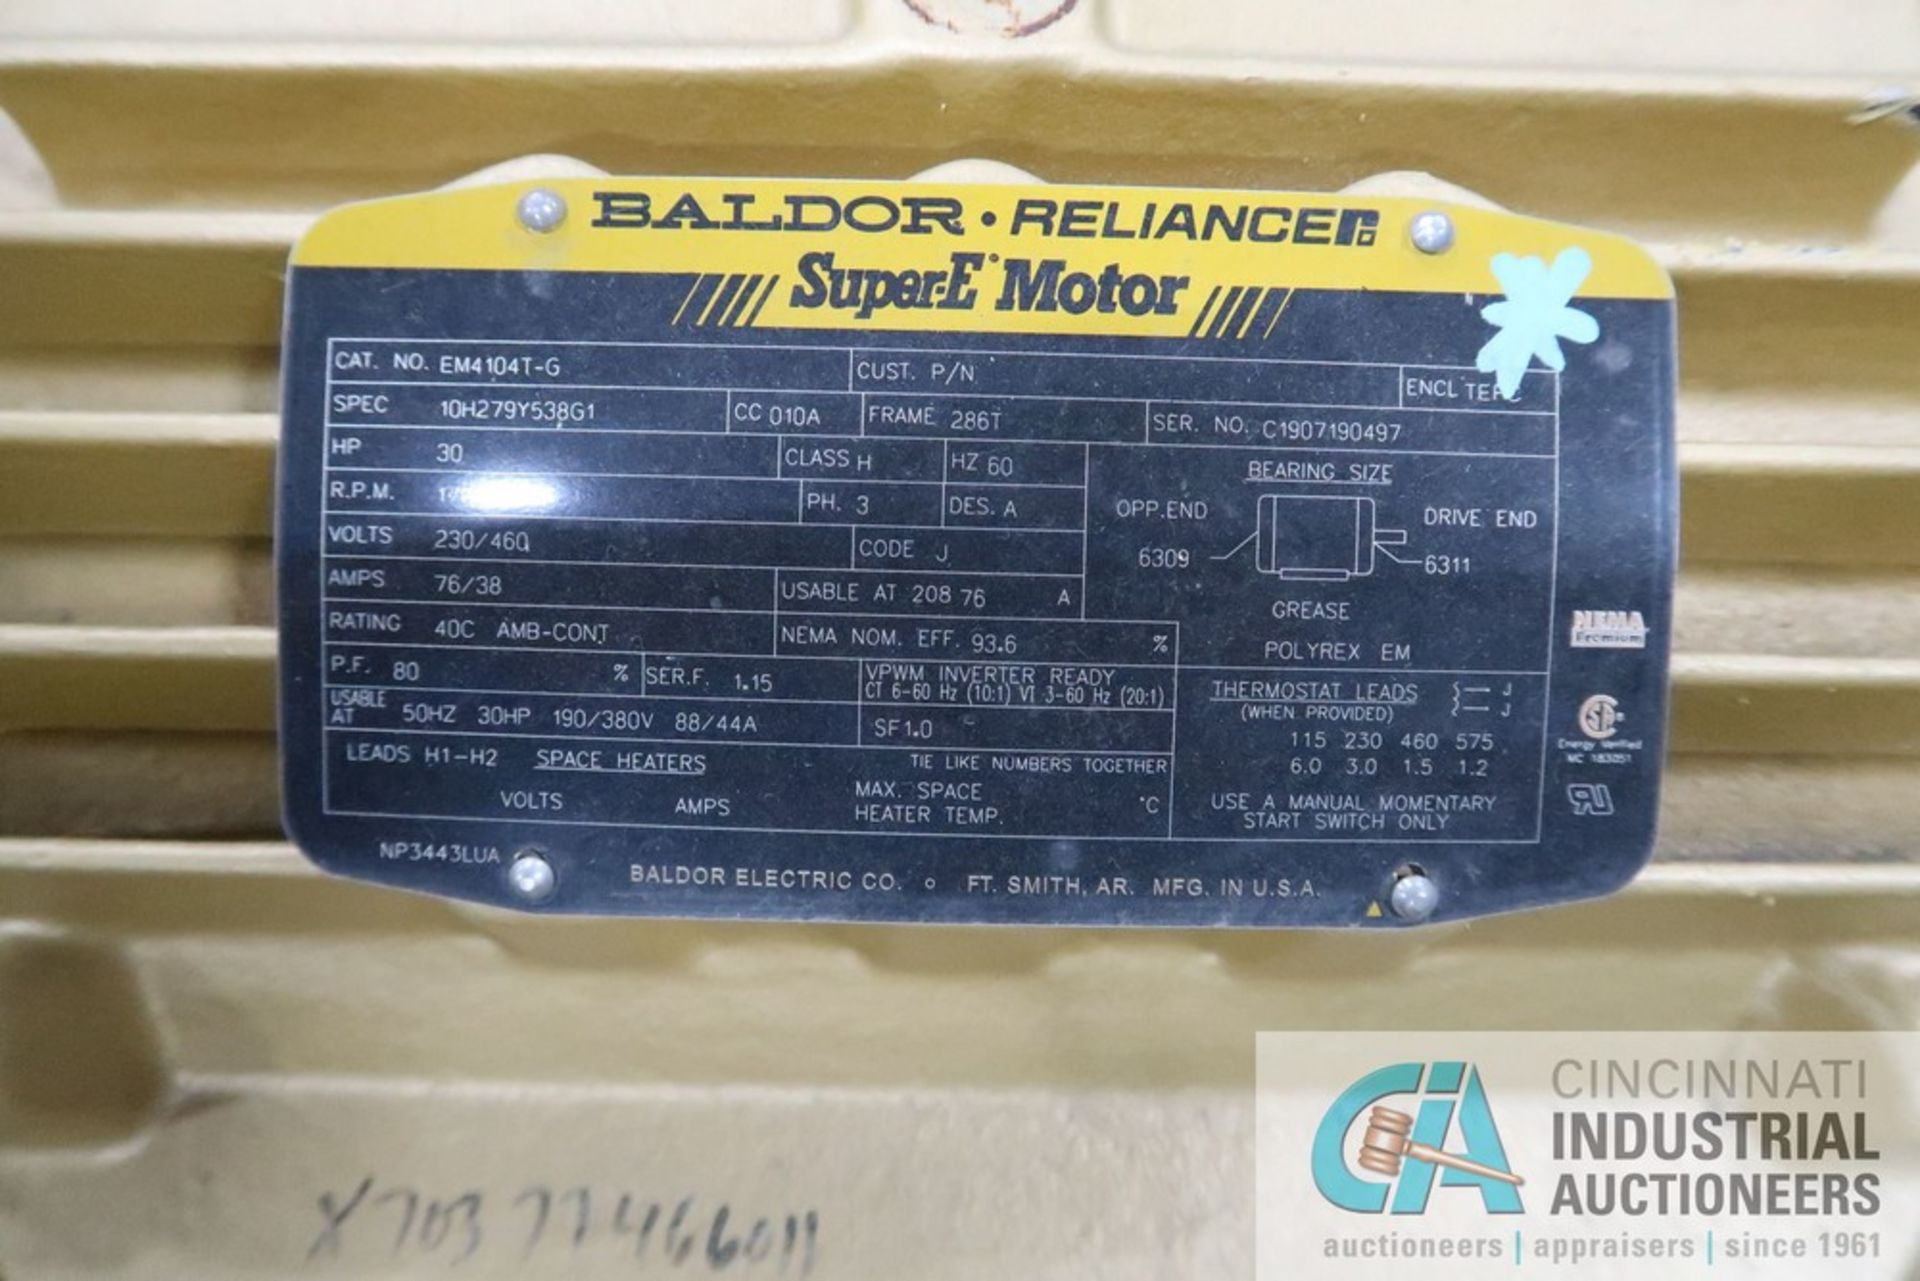 30 HP BALDOR / RELIANCE SUPER E MOTOR DIRECT DRIVE FANS, 230/460 VOLTS, 3 PHASE, 60 HZ - Image 5 of 6